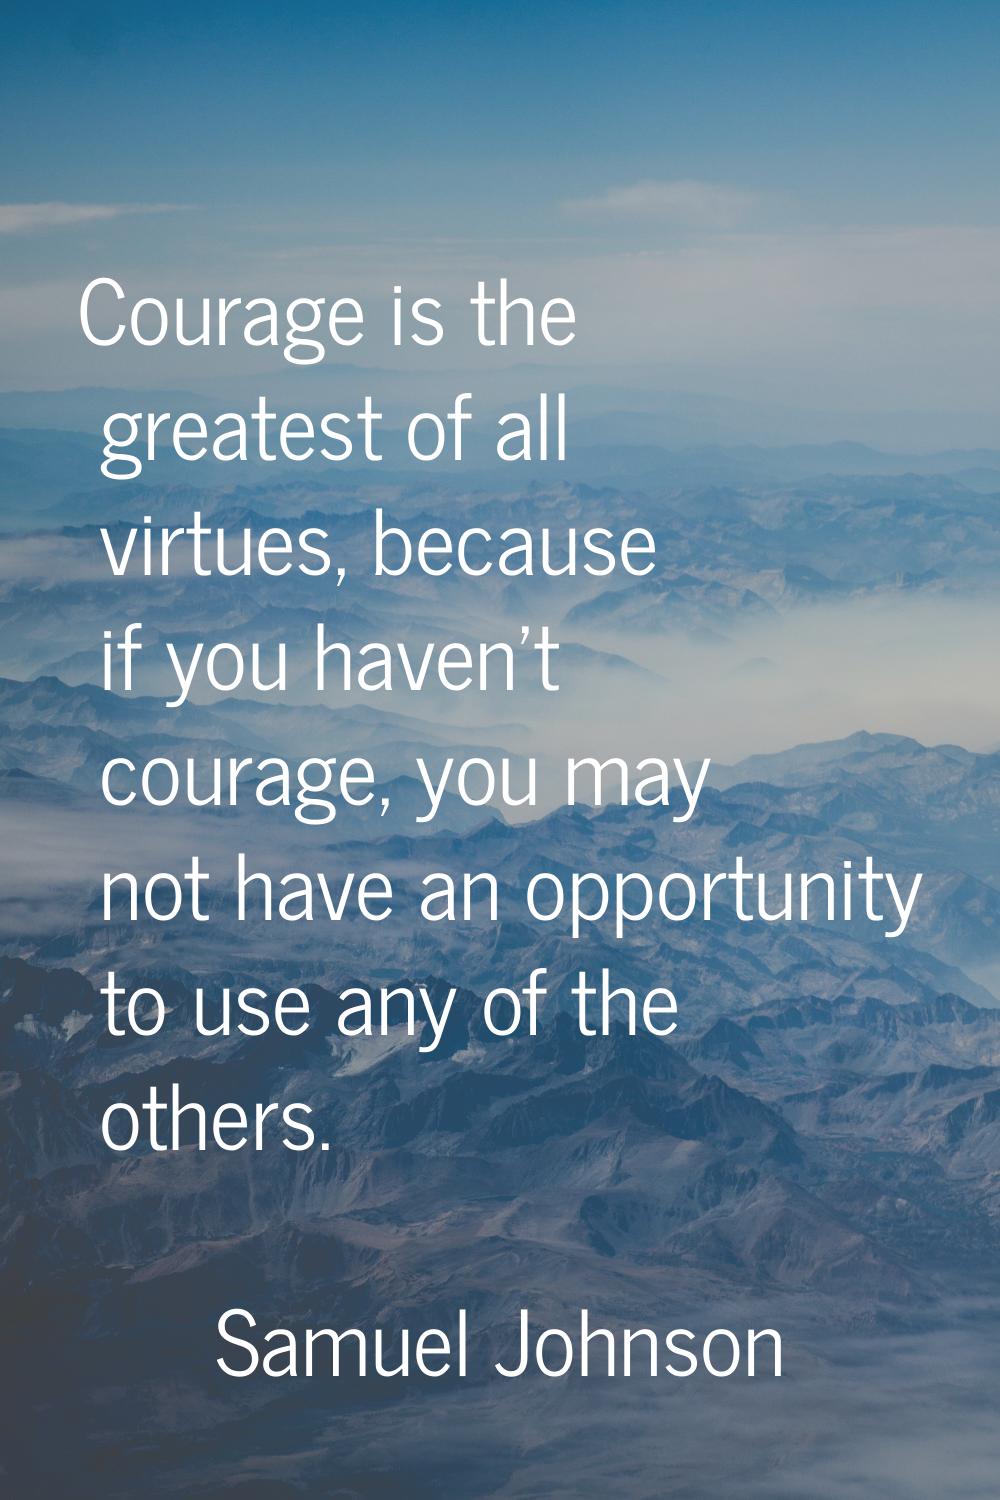 Courage is the greatest of all virtues, because if you haven't courage, you may not have an opportu